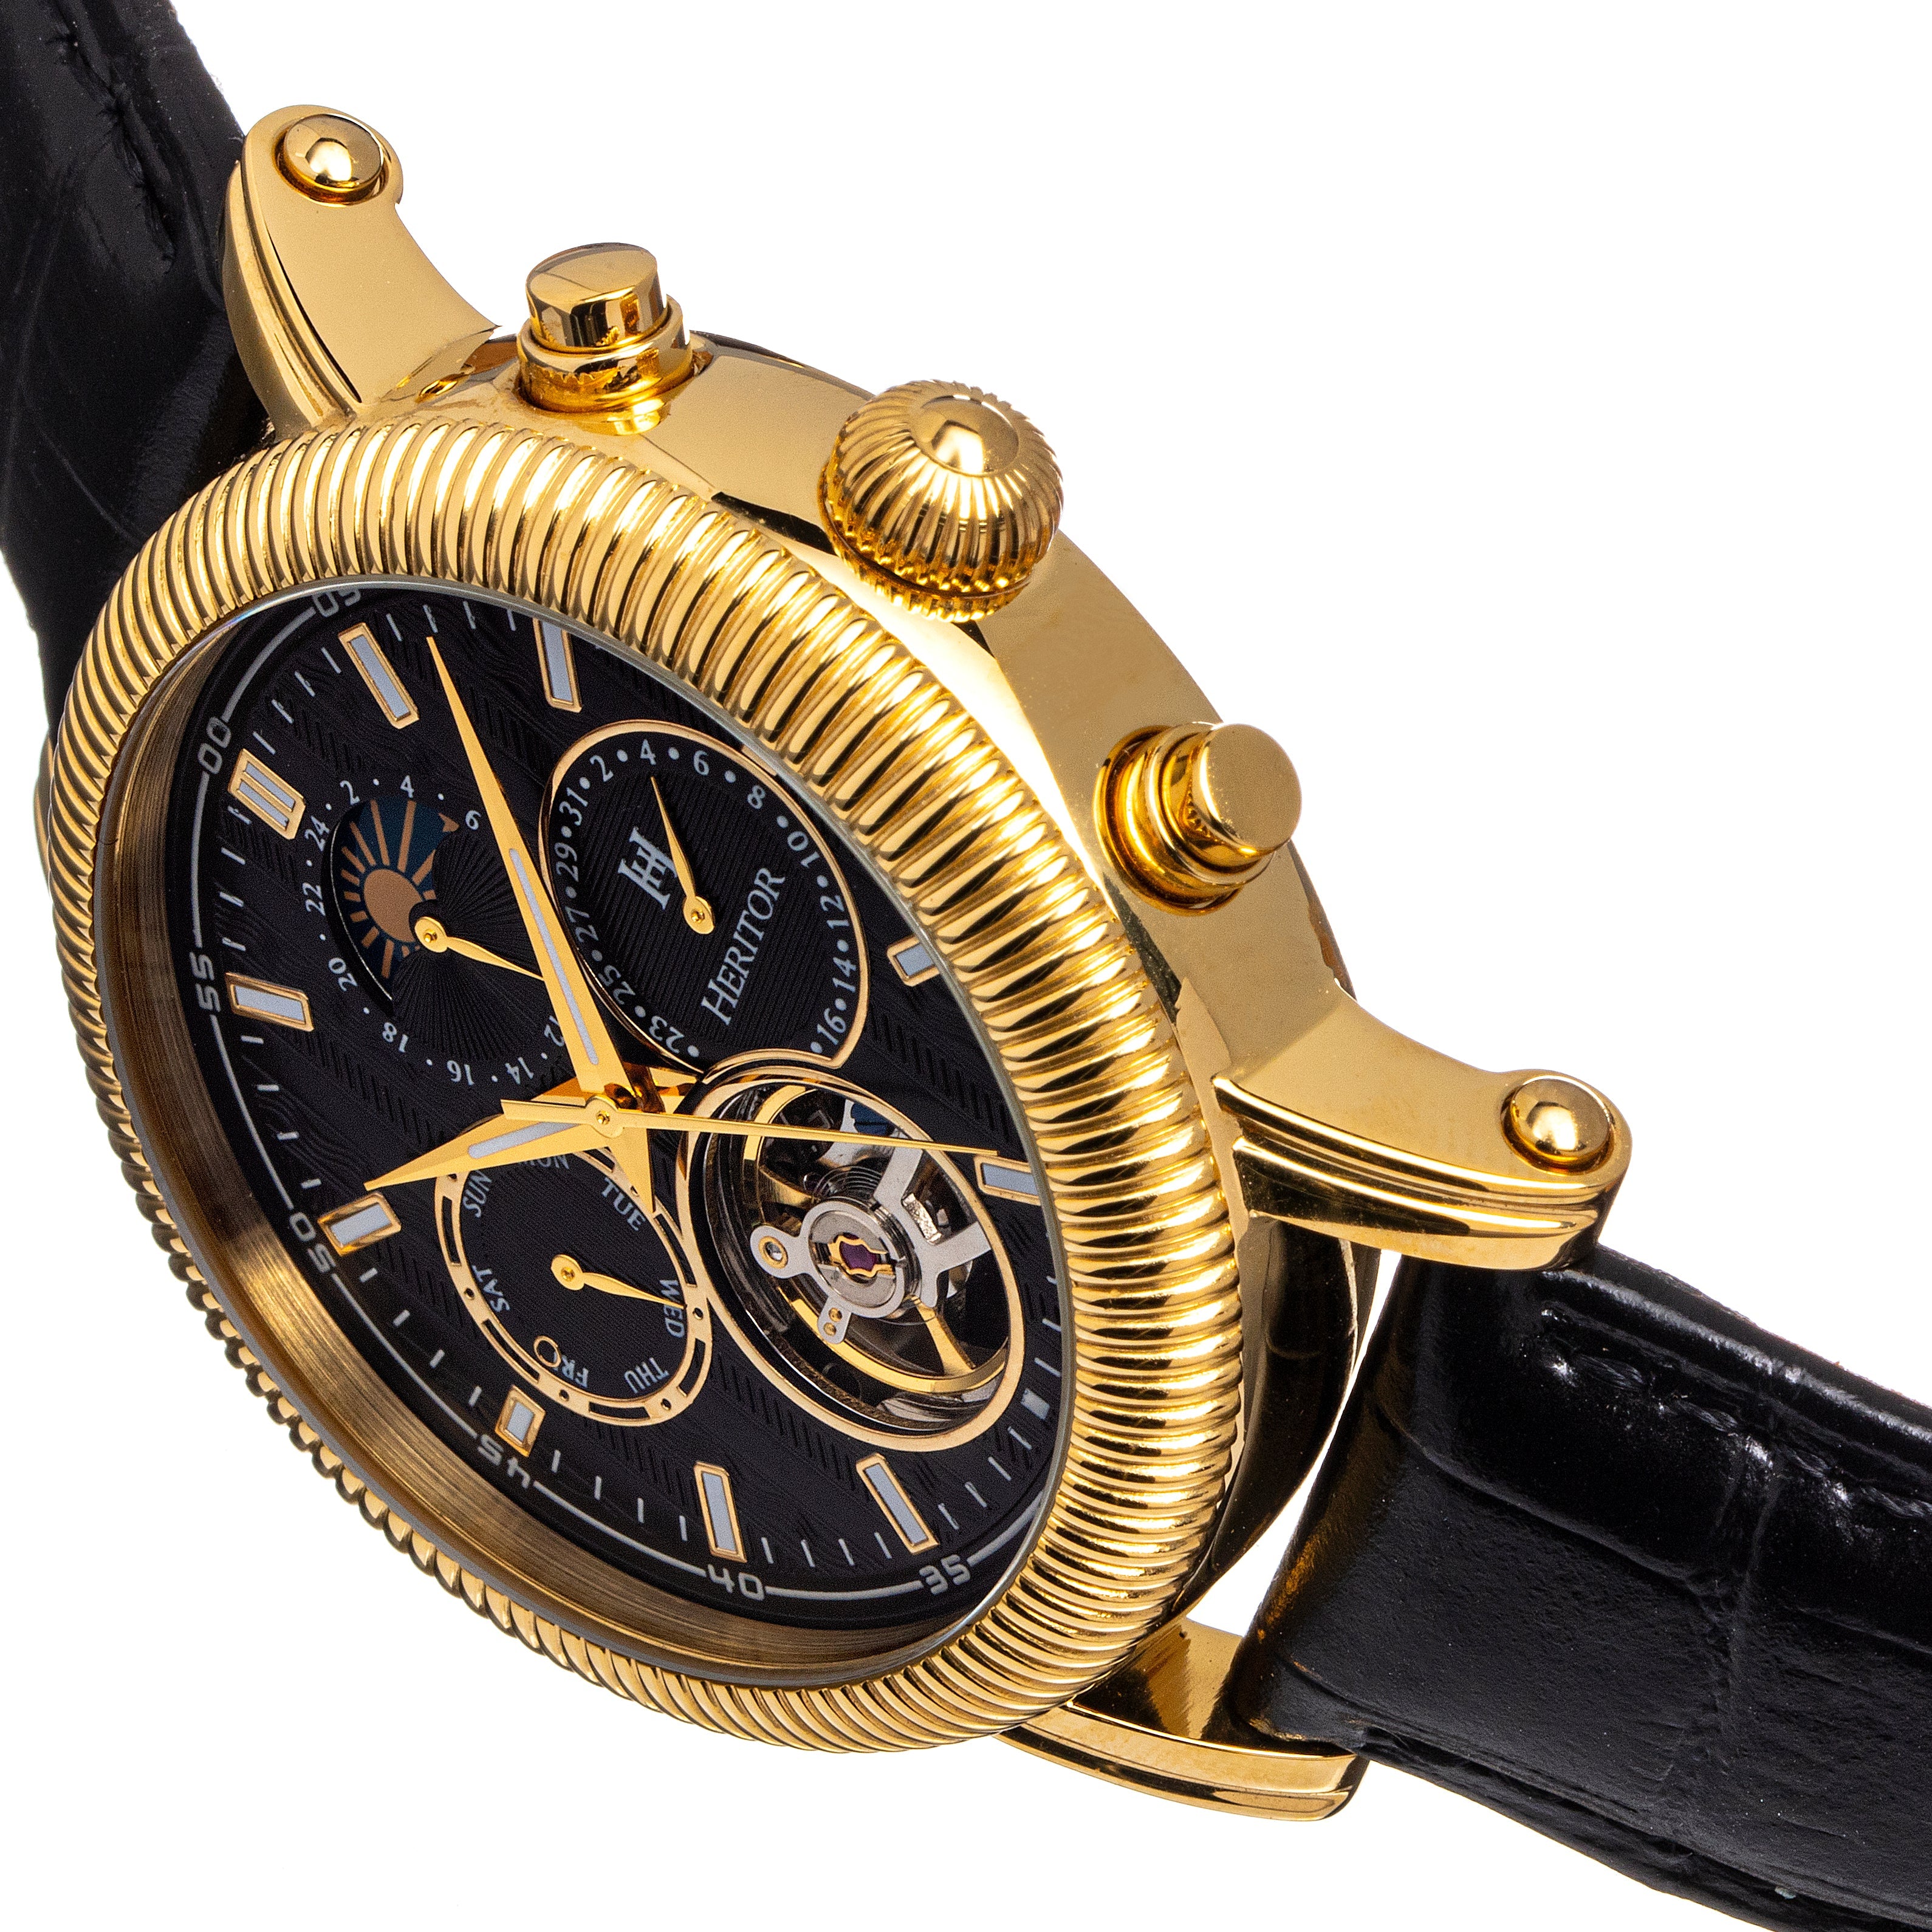 Heritor Automatic Barnsley Semi-Skeleton Leather-Band Watch - Gold/Black - HERHS1803